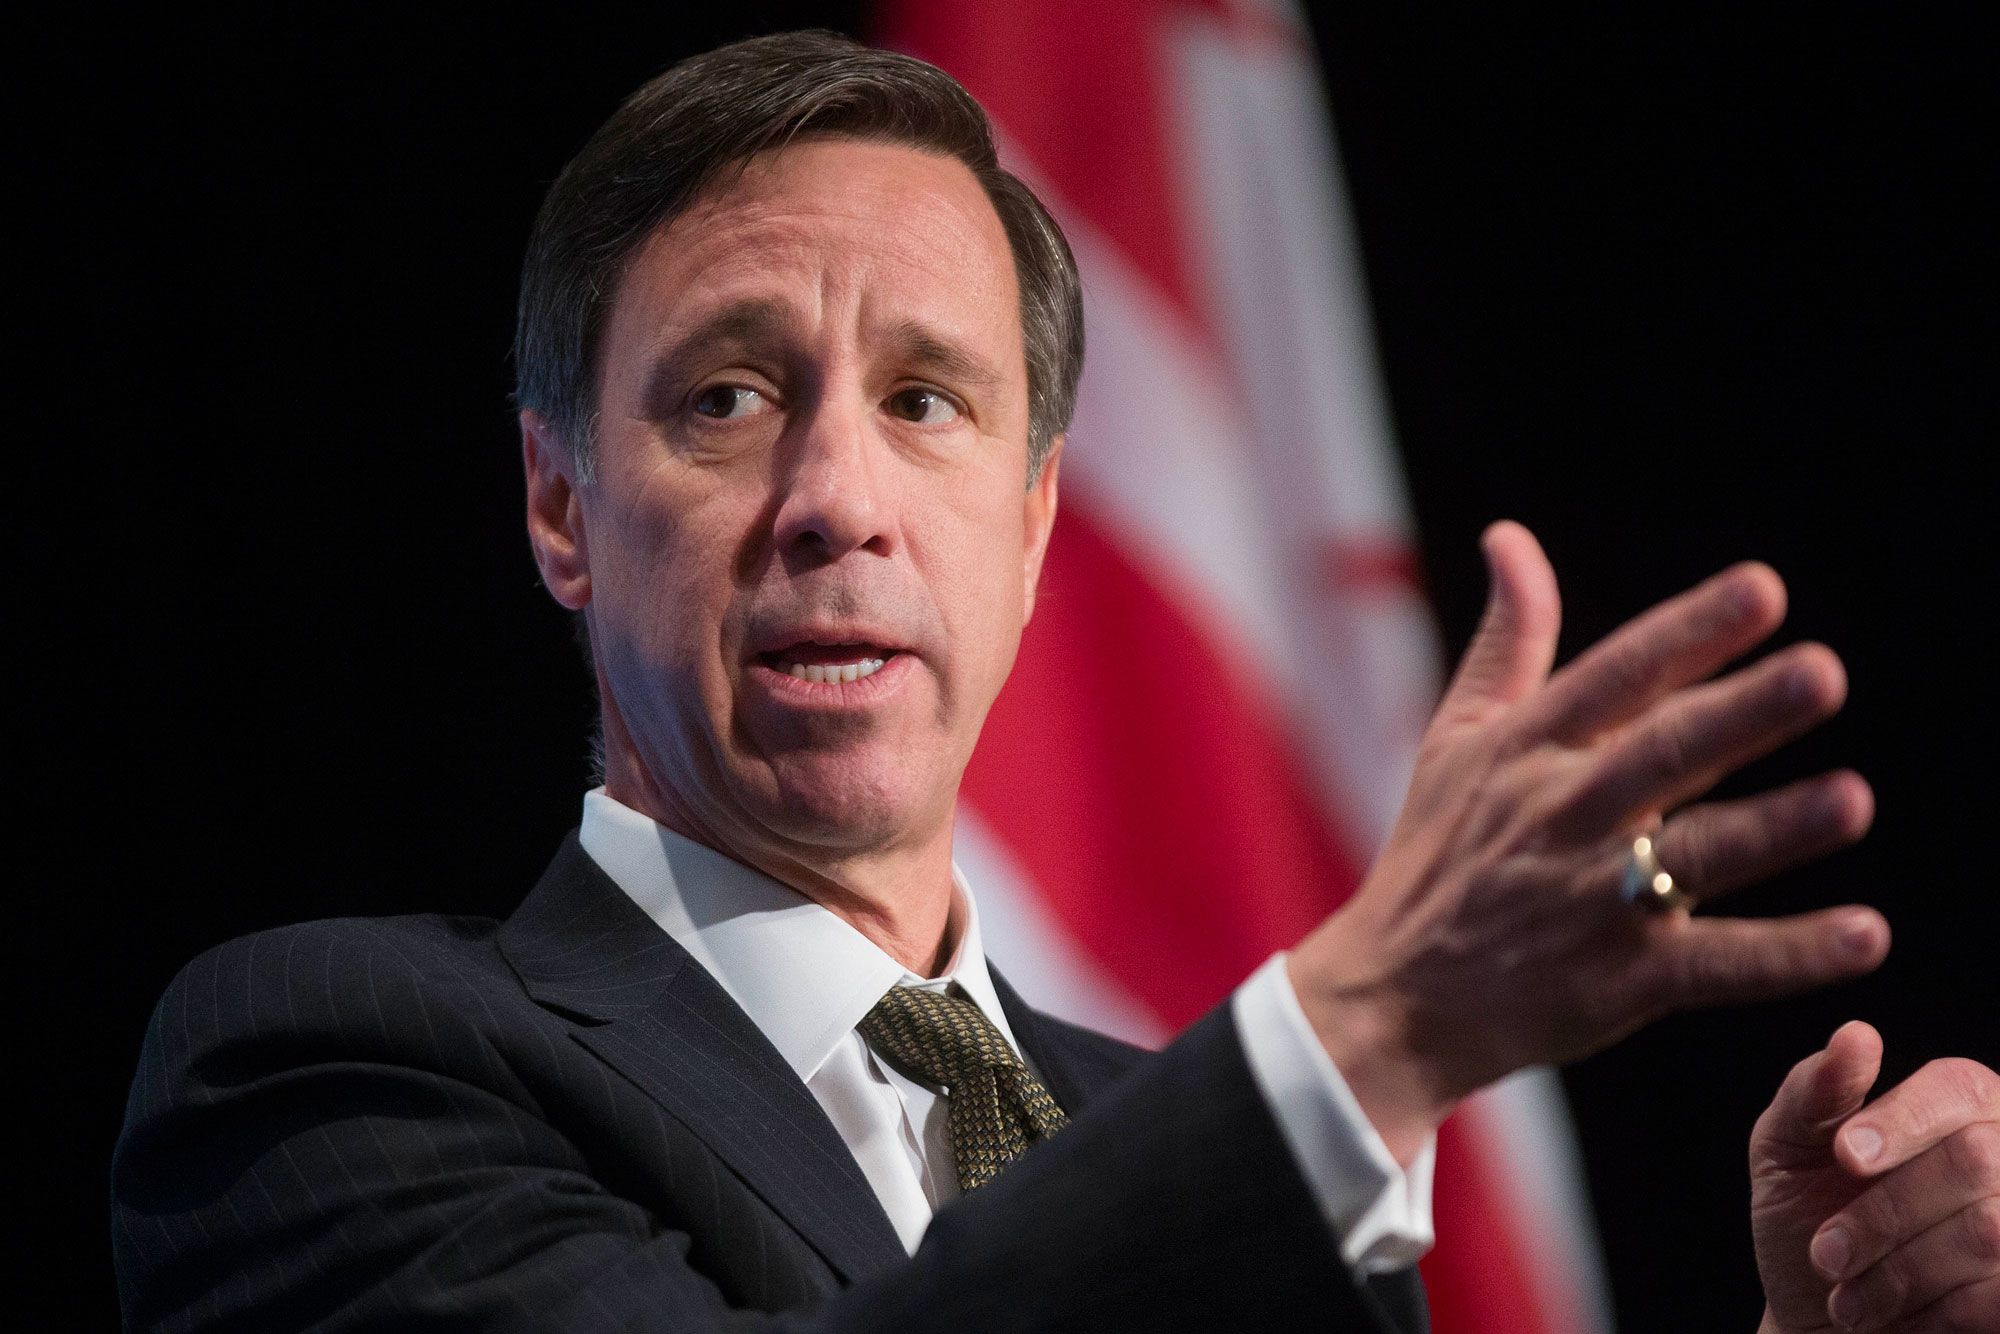 Marriott CEO Arne Sorenson diagnosed with stage 2 pancreatic cancer